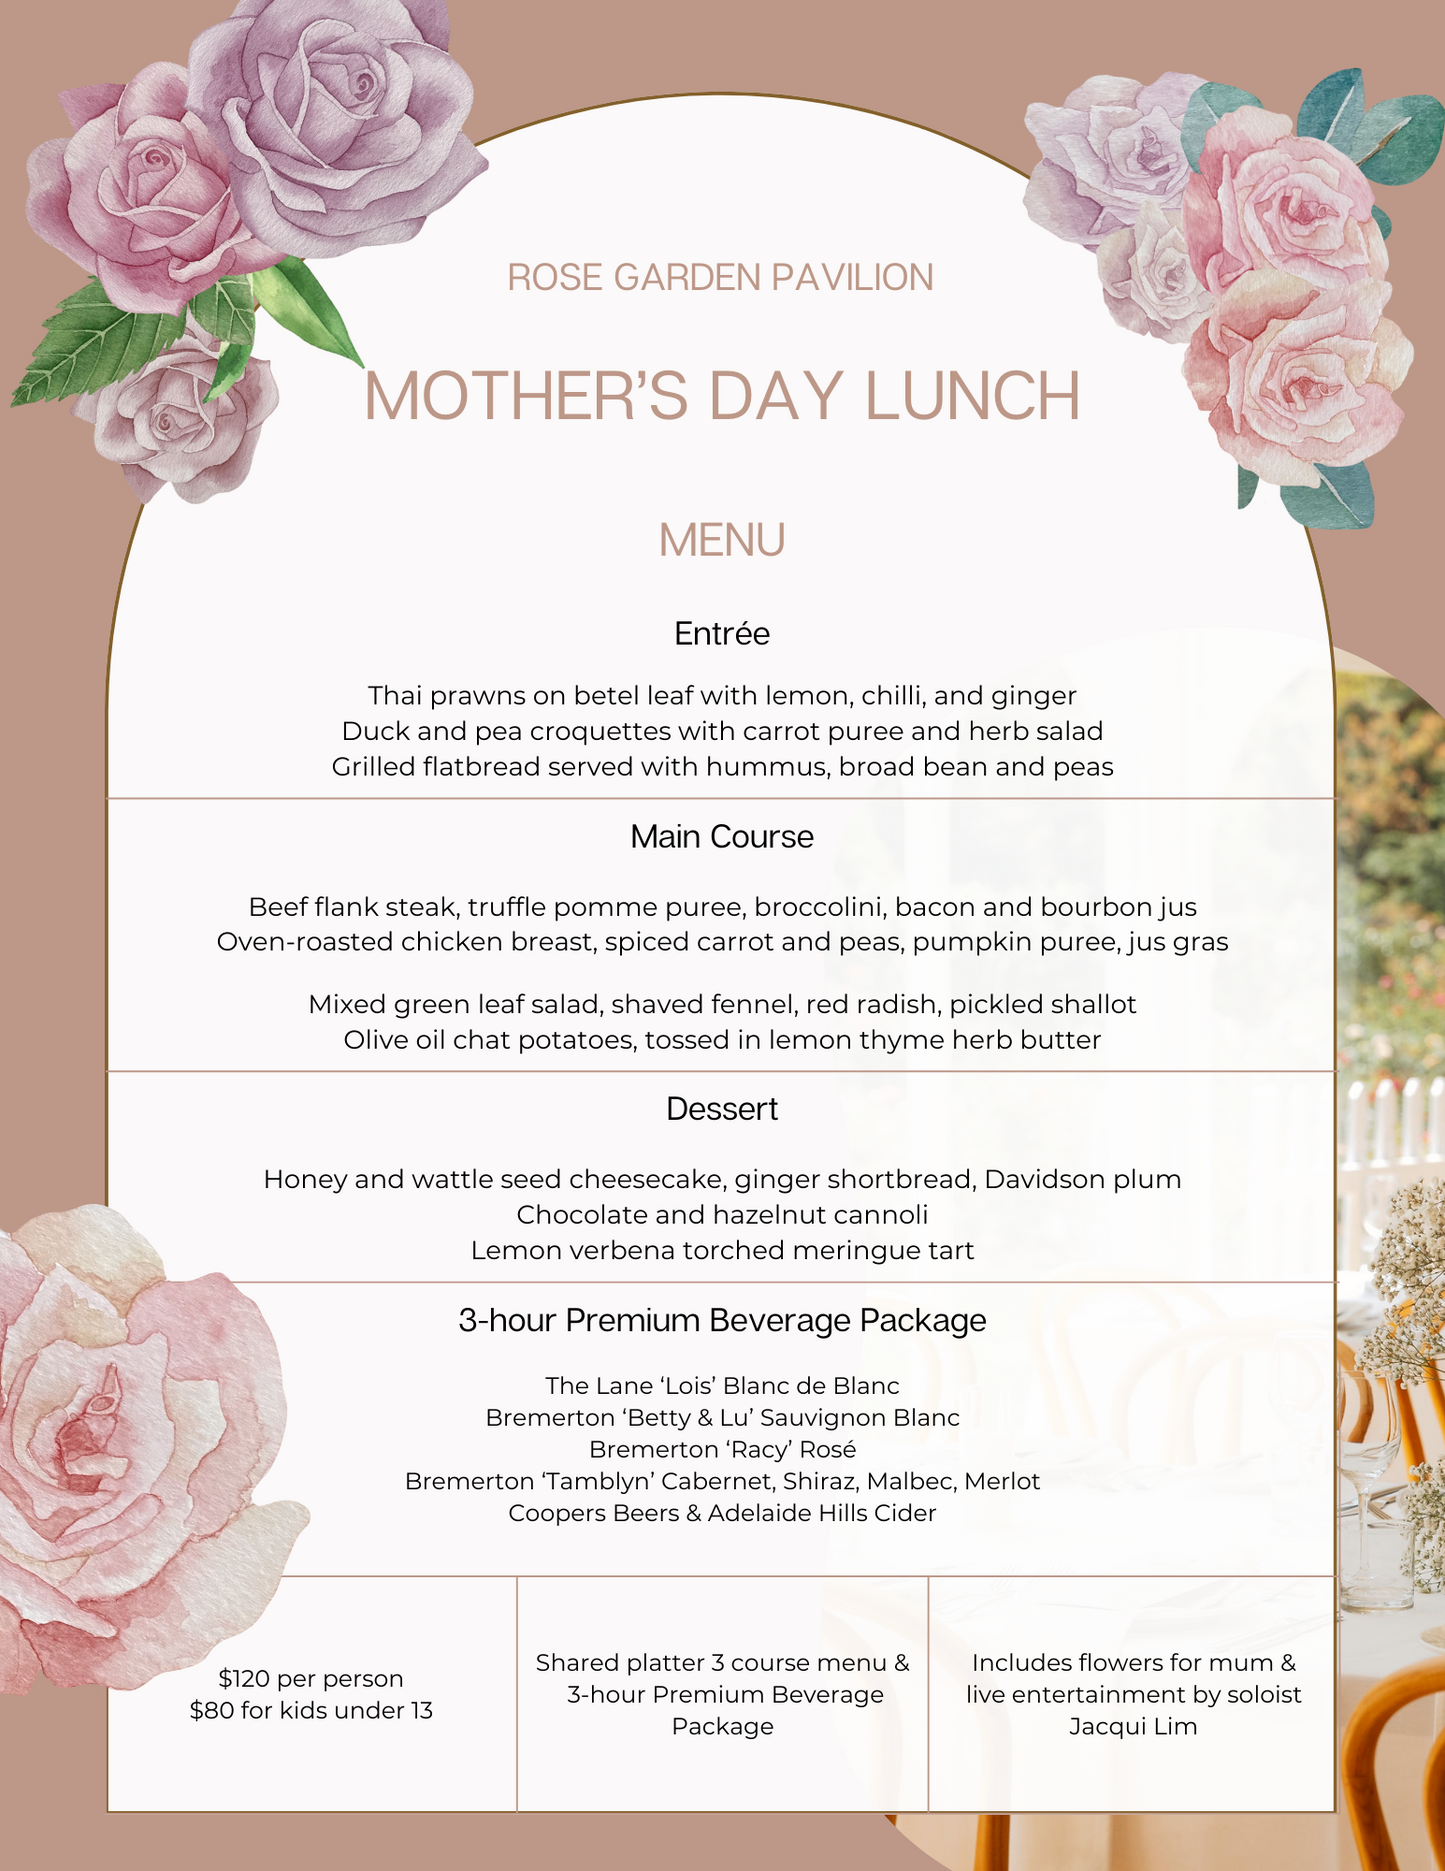 Mother’s Day Lunch at the Rose Garden